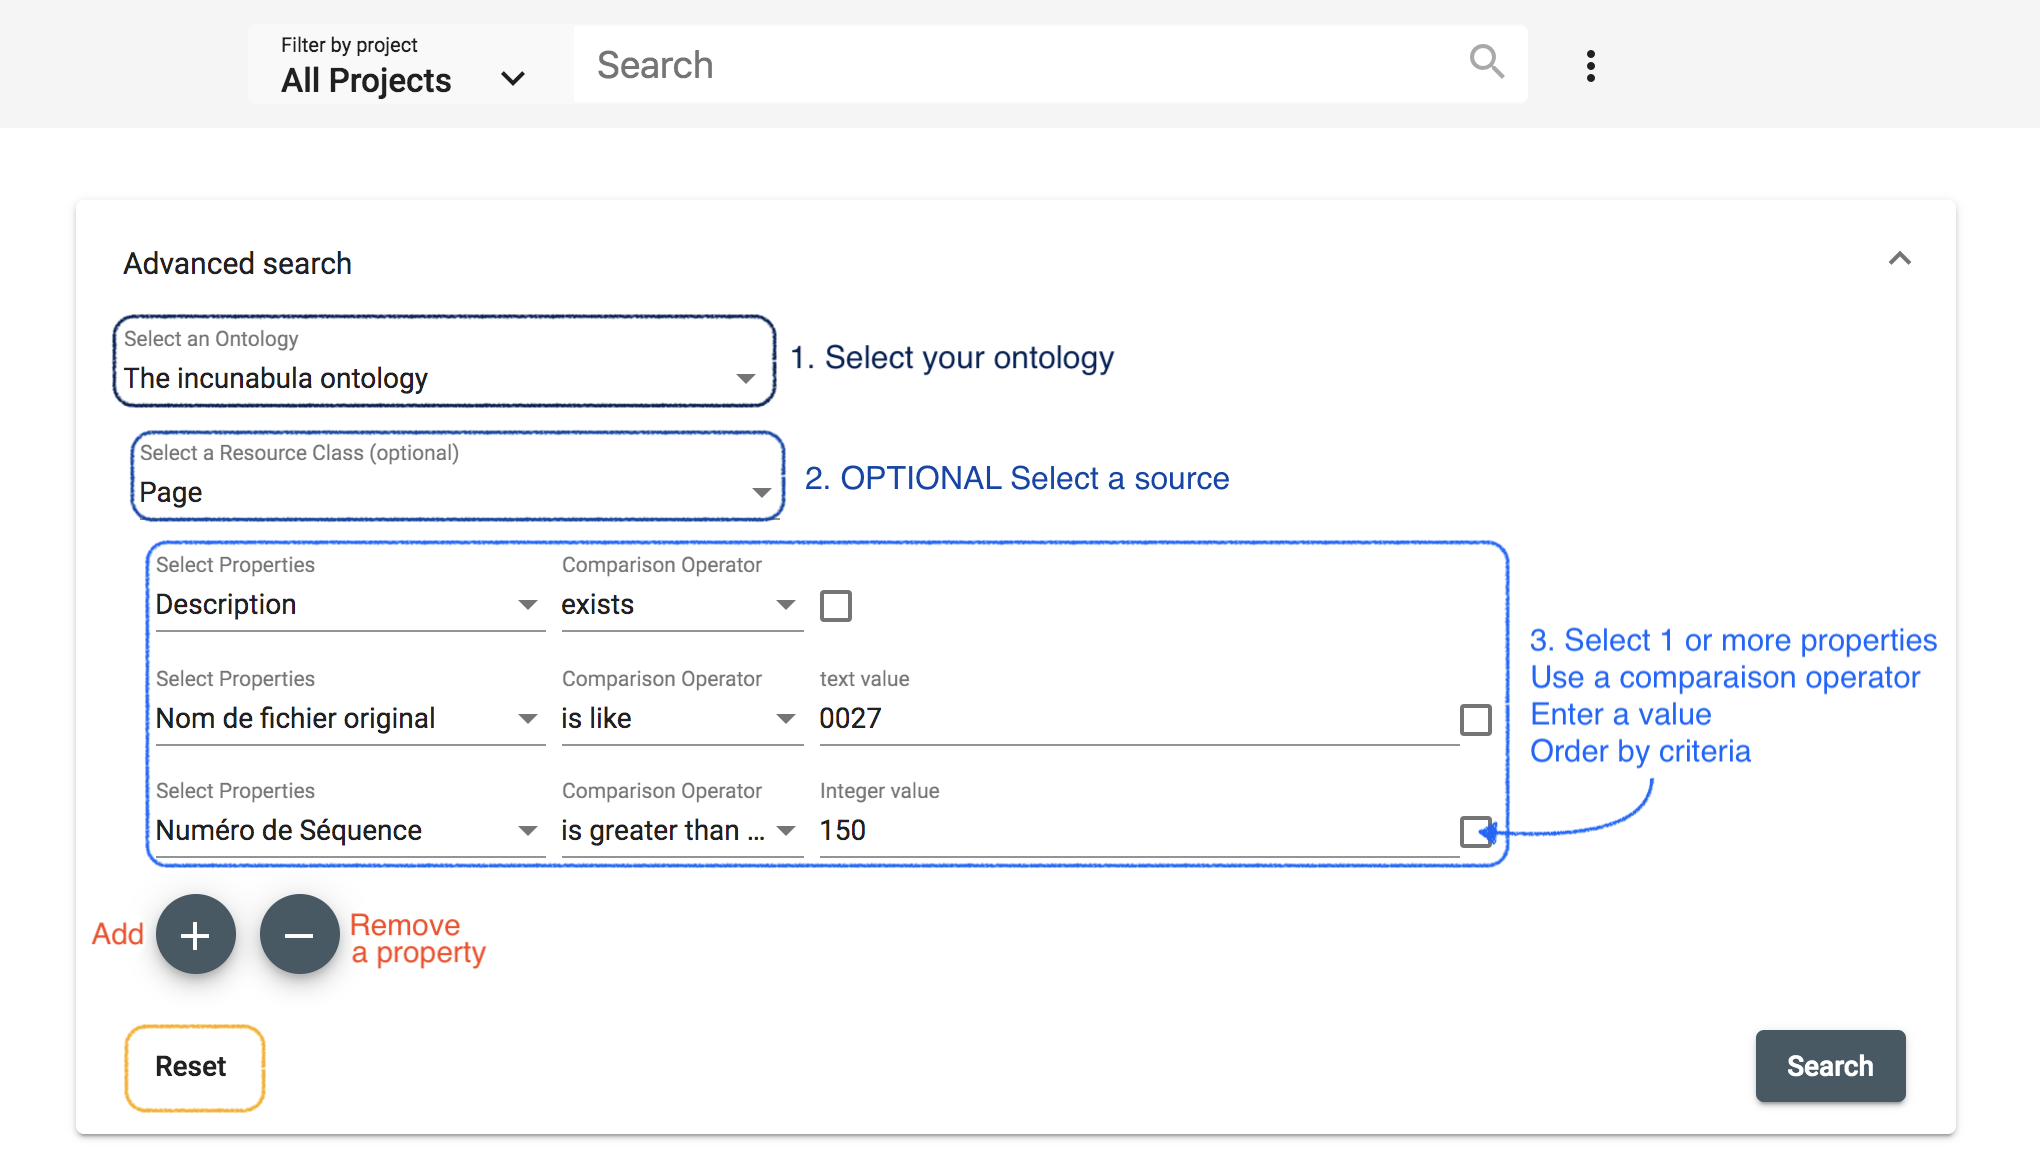 Search 2: Advanced search offers many filter combinations and is a powerful search tool.